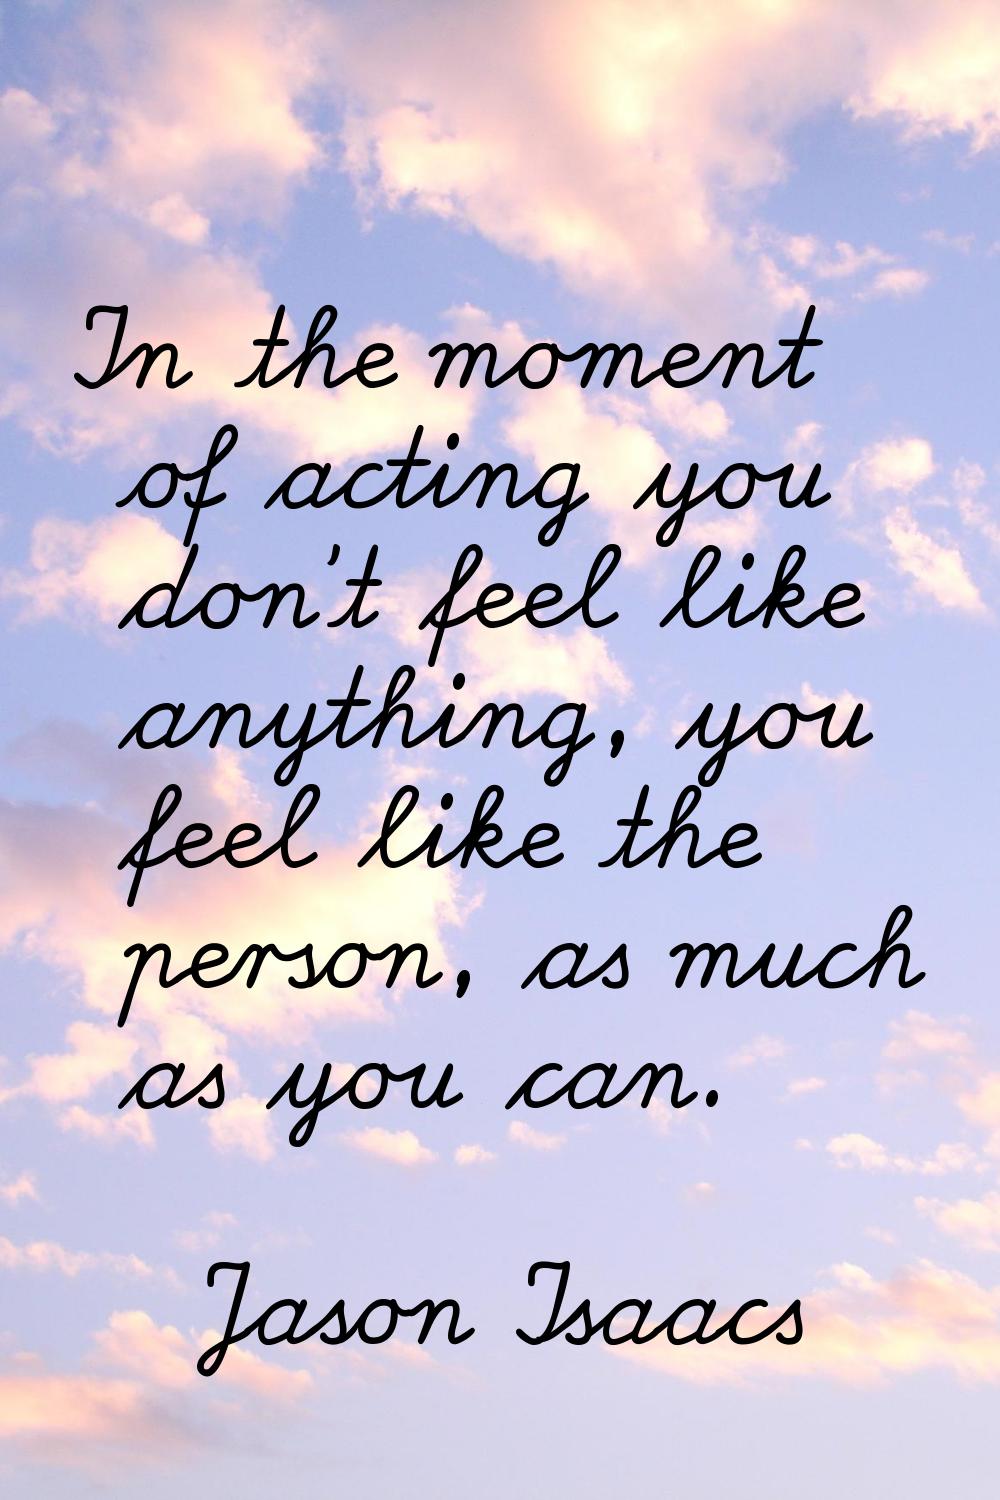 In the moment of acting you don't feel like anything, you feel like the person, as much as you can.